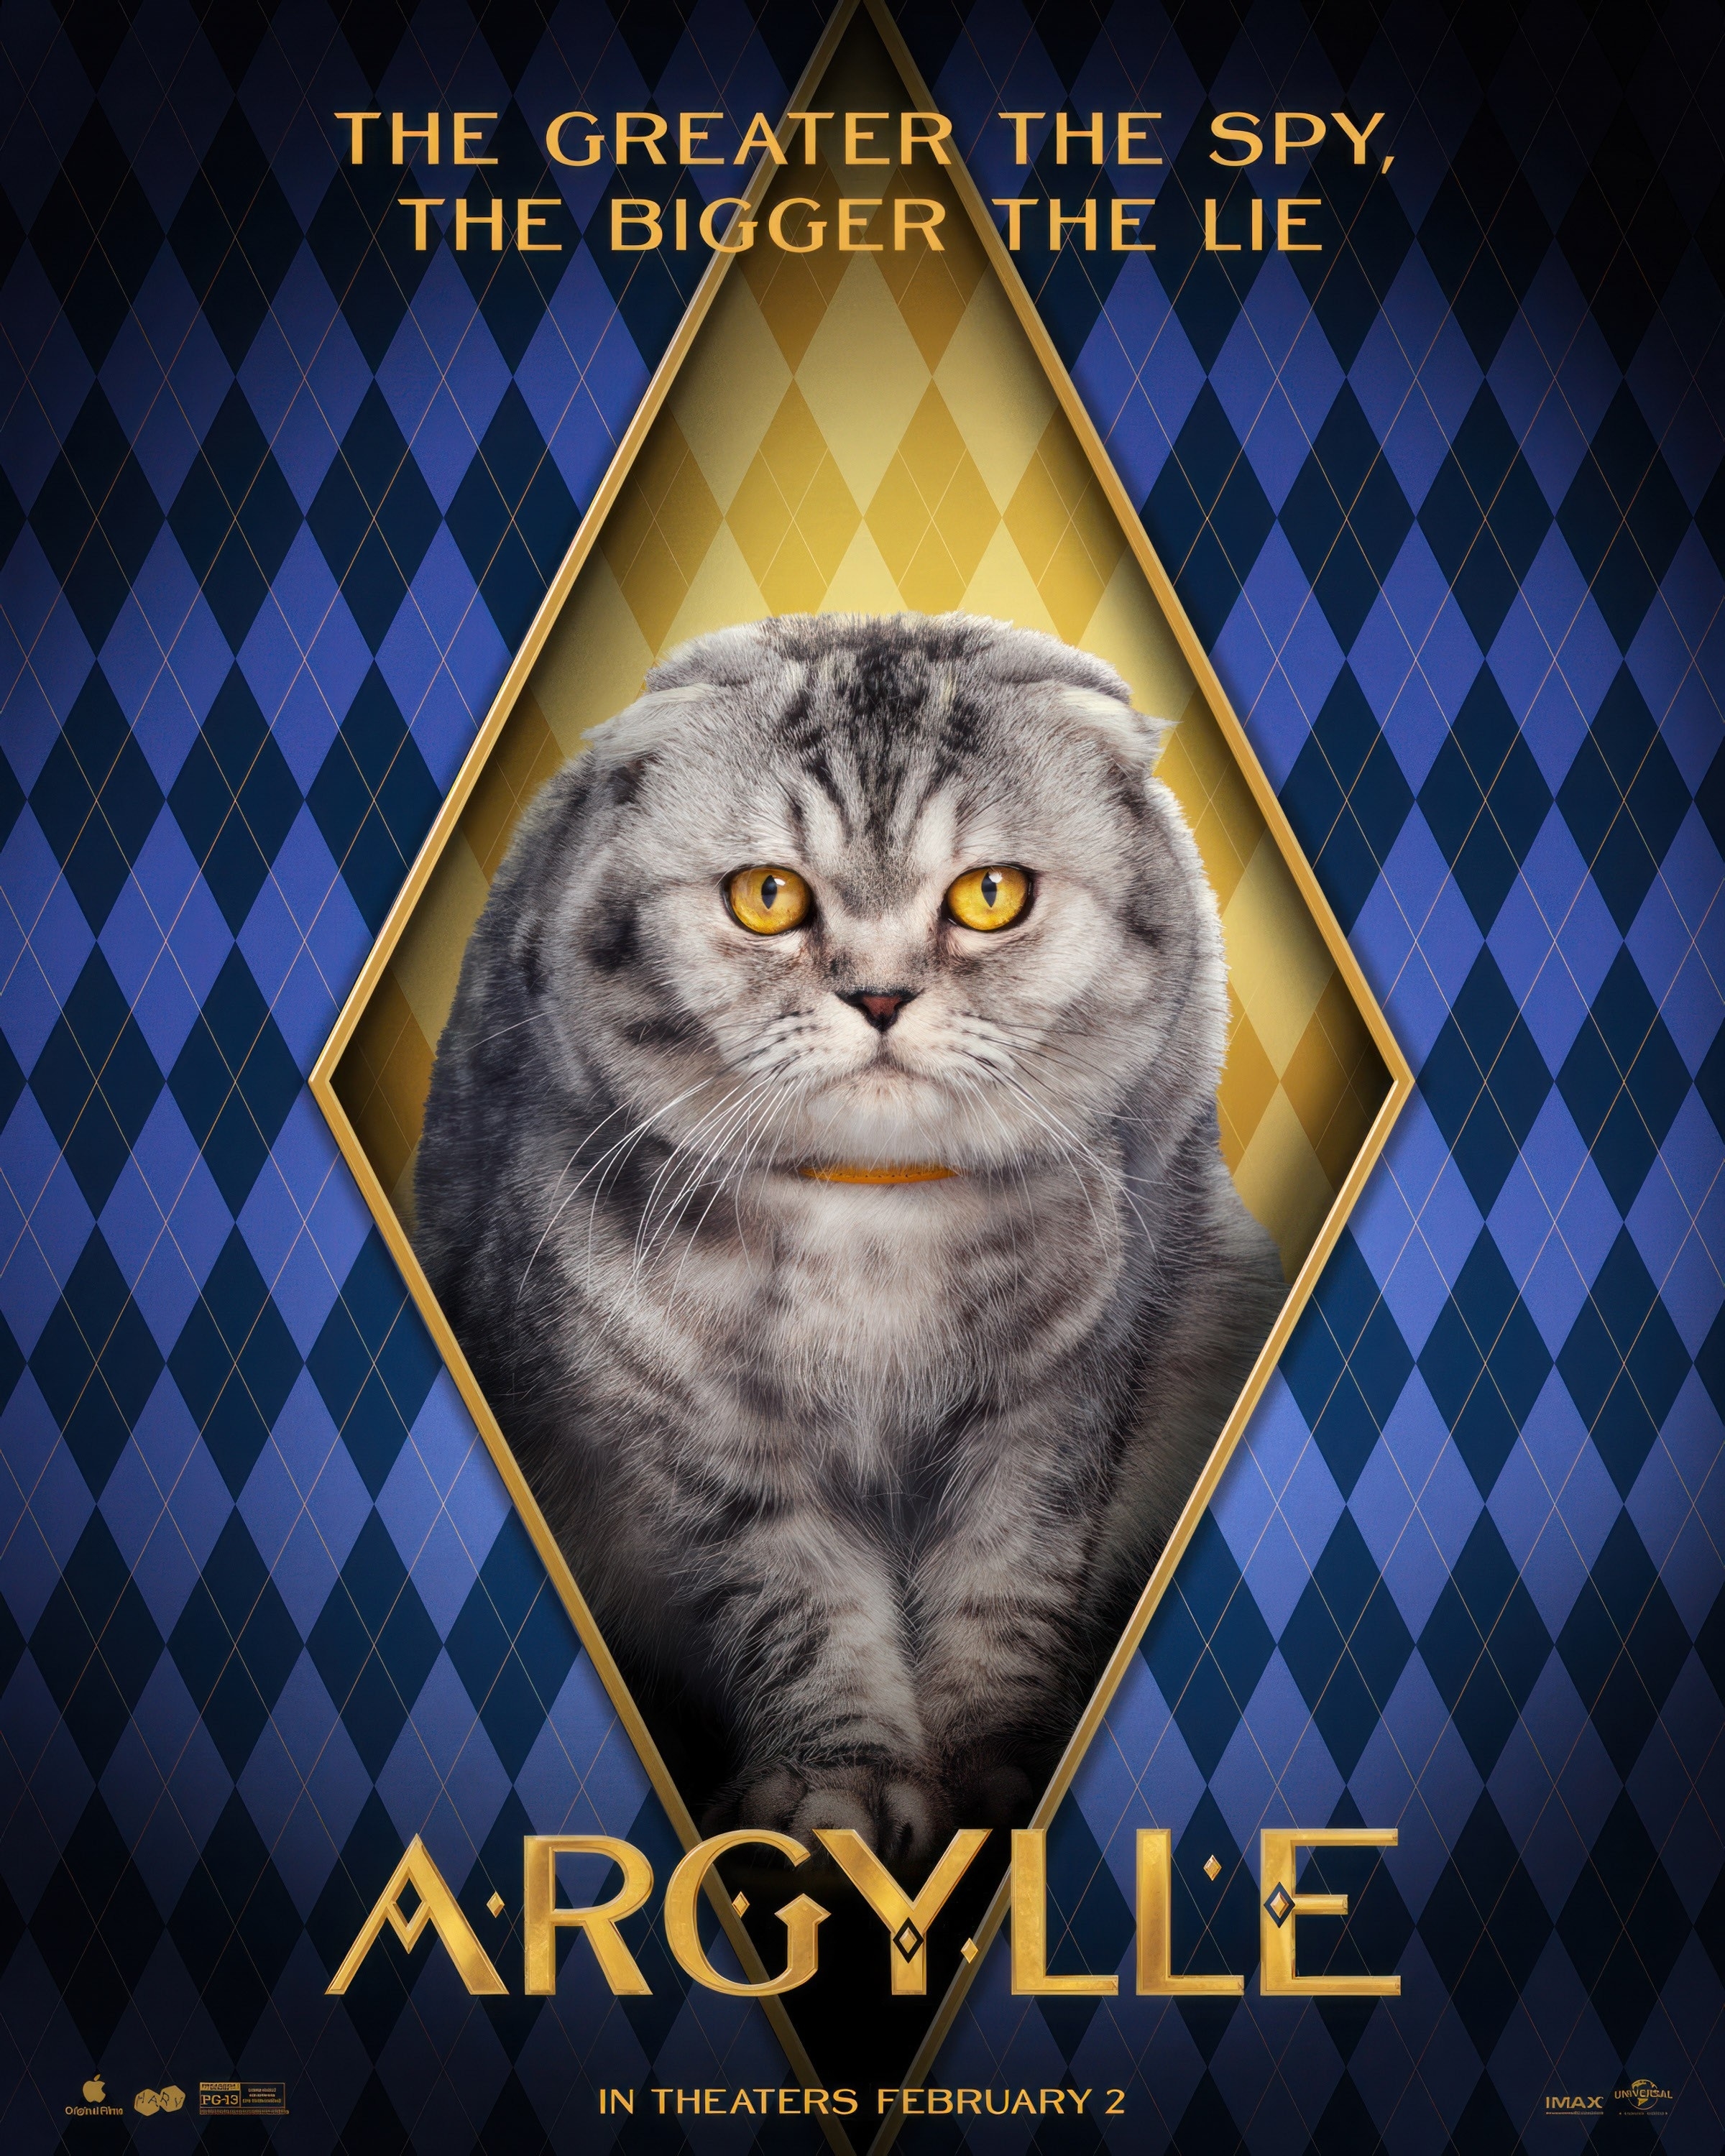 A poster for the movie featuring a closeup of the cat